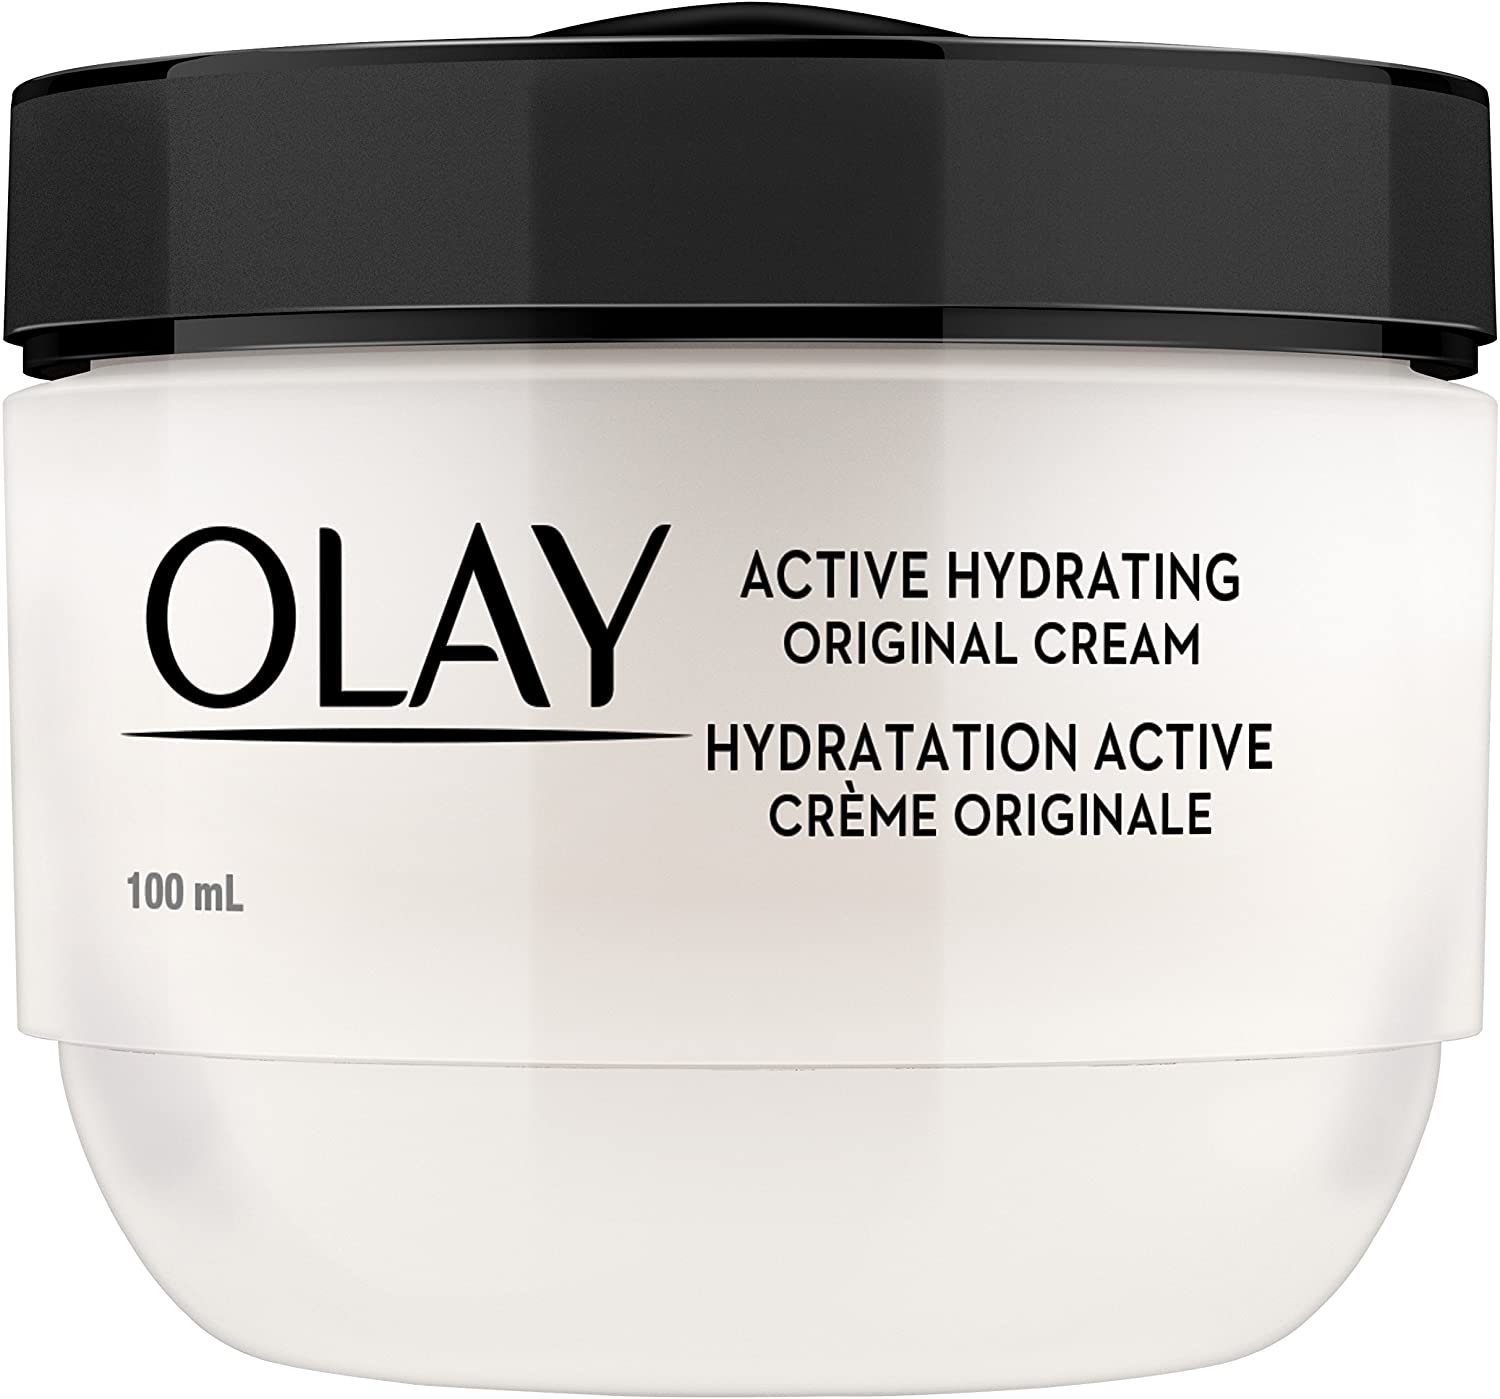 olay-moisturizing-cream-super-hydrating-removes-dry-lines-and-moisturizes-facial-skin-2021-6-8-2021-6-8